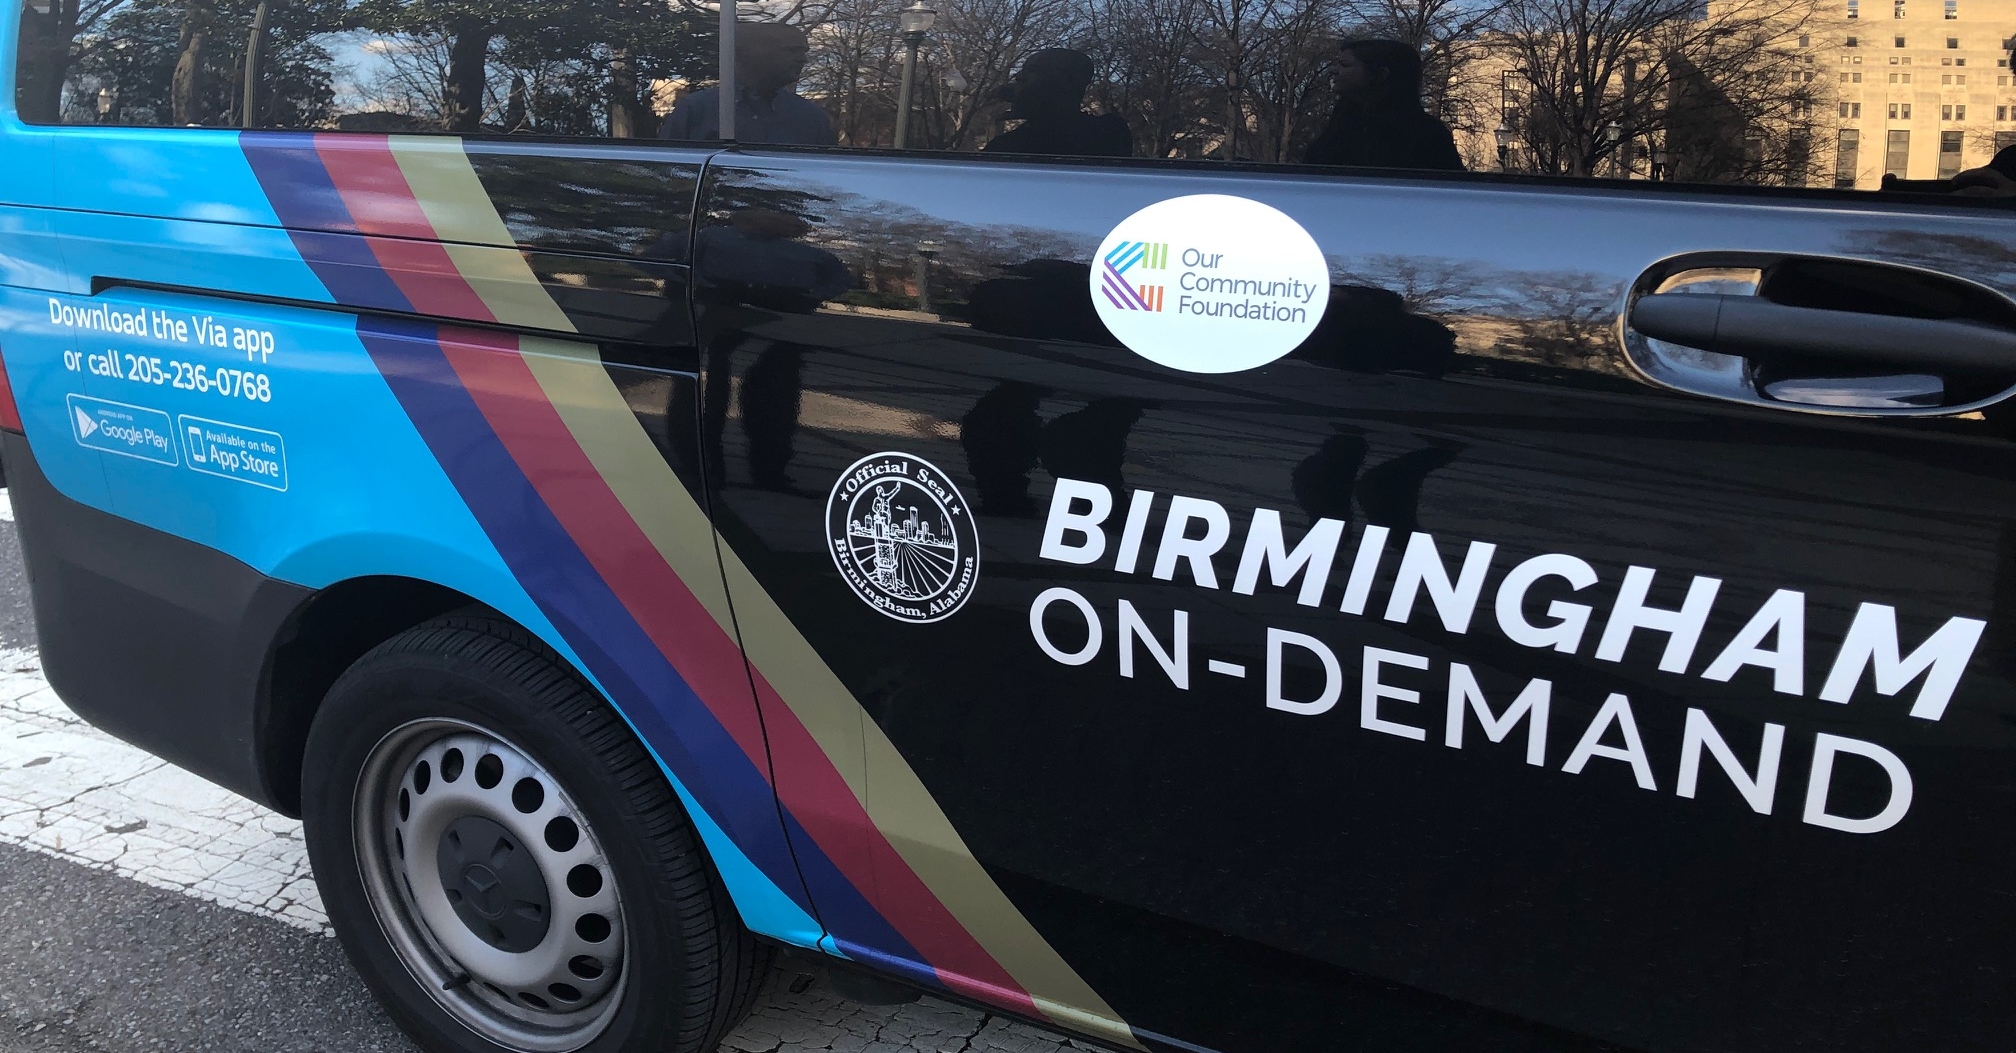 Community Foundation Via logos e1605878257568 Birmingham On-Demand tops 25,500 rides in first 11 months